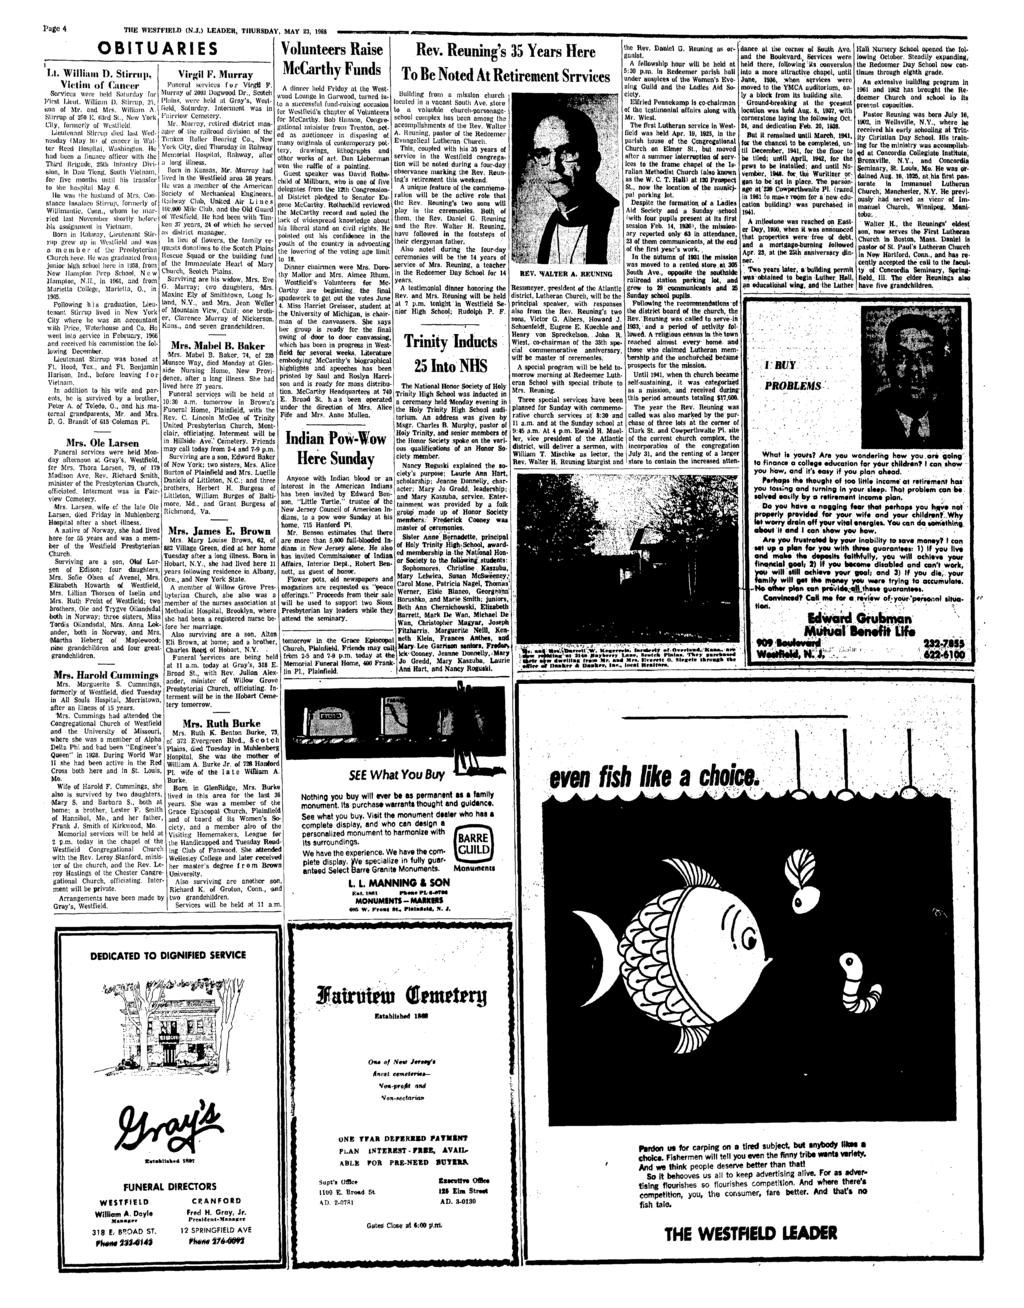 Page THE WESTFELD (N.J.) LEADER, THURSDAY, MAY, B8 OBTUARES Ll. Wllam D. Strrup, Vctm of (]un<:er were held Saturday for Frst Leut. Wllnm X Strrup. -. «on of Mr, and Mrs. Wllam A. vsrrup ot fo E.